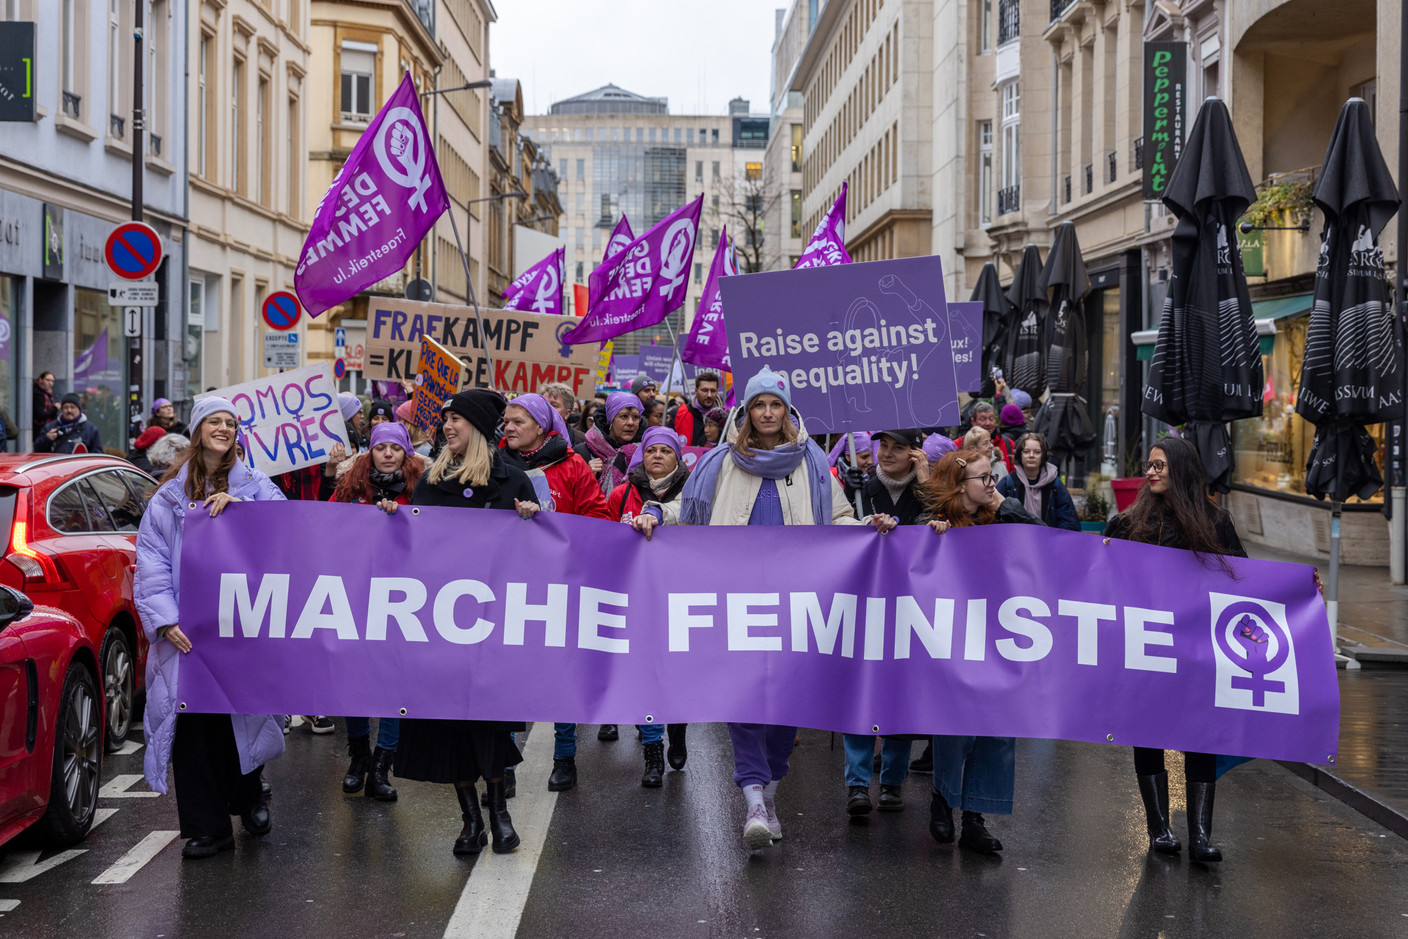 Women at the head of the march, which welcomed anyone in support of women’s rights and equality Photo: Romain Gamba